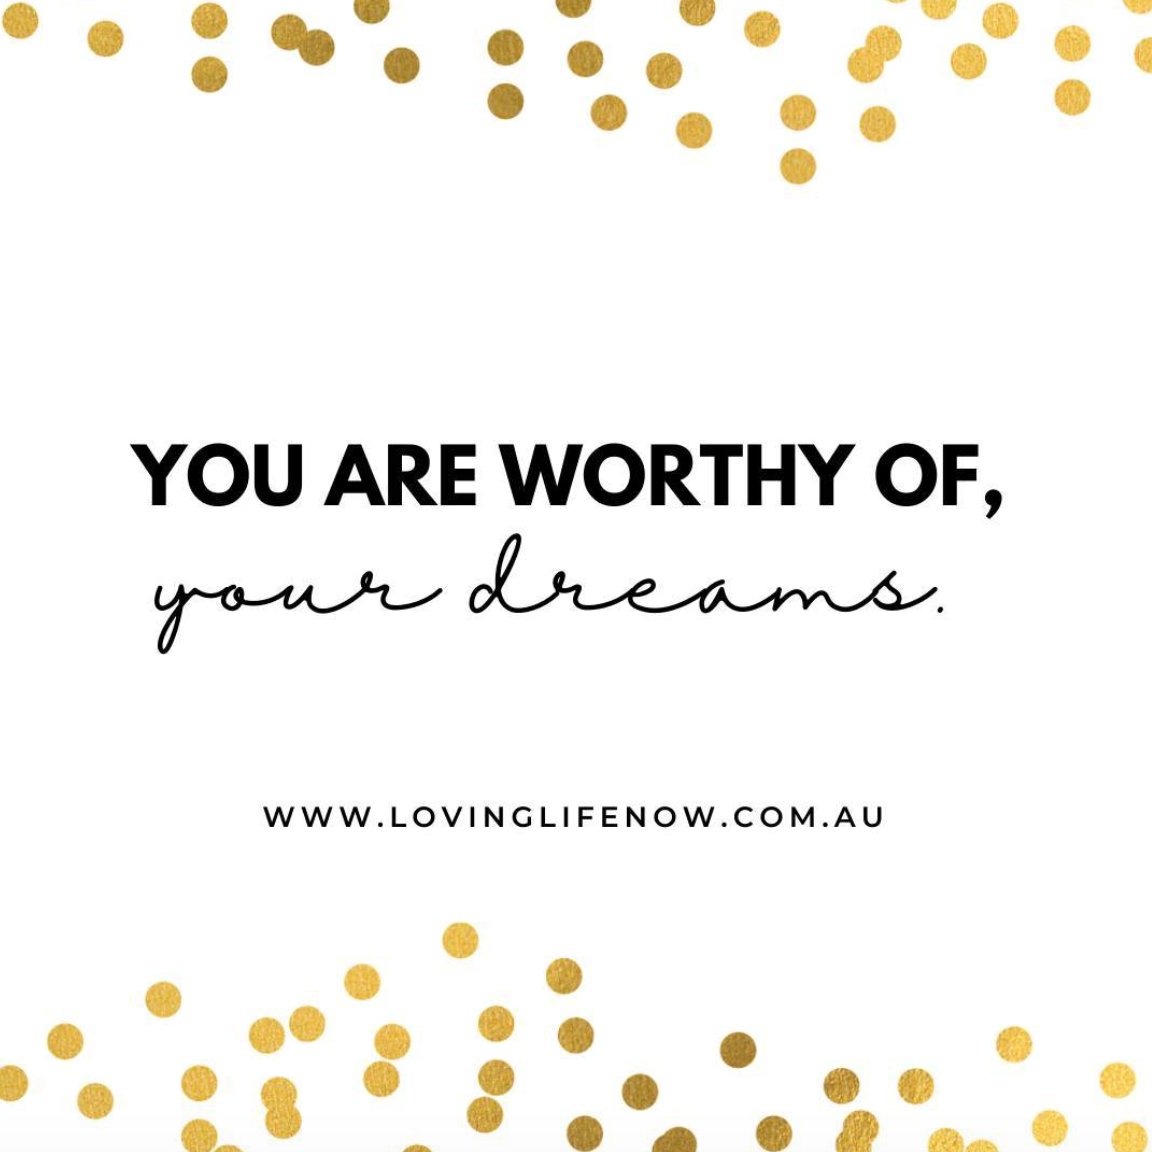 You are worthy of, your dreams
-
-
#LivingLovingLife
#OnlineIncomeOpportunity #WorkFromAnywhere #OnlineBusinessSolution
#SimonAndLeeAnne #LifestyleLoveAndBeyond
#LaptopLifestyle #PortableOnlineBusiness
#SimonHaggard #LeeAnneHaggard #LovingLifeNow